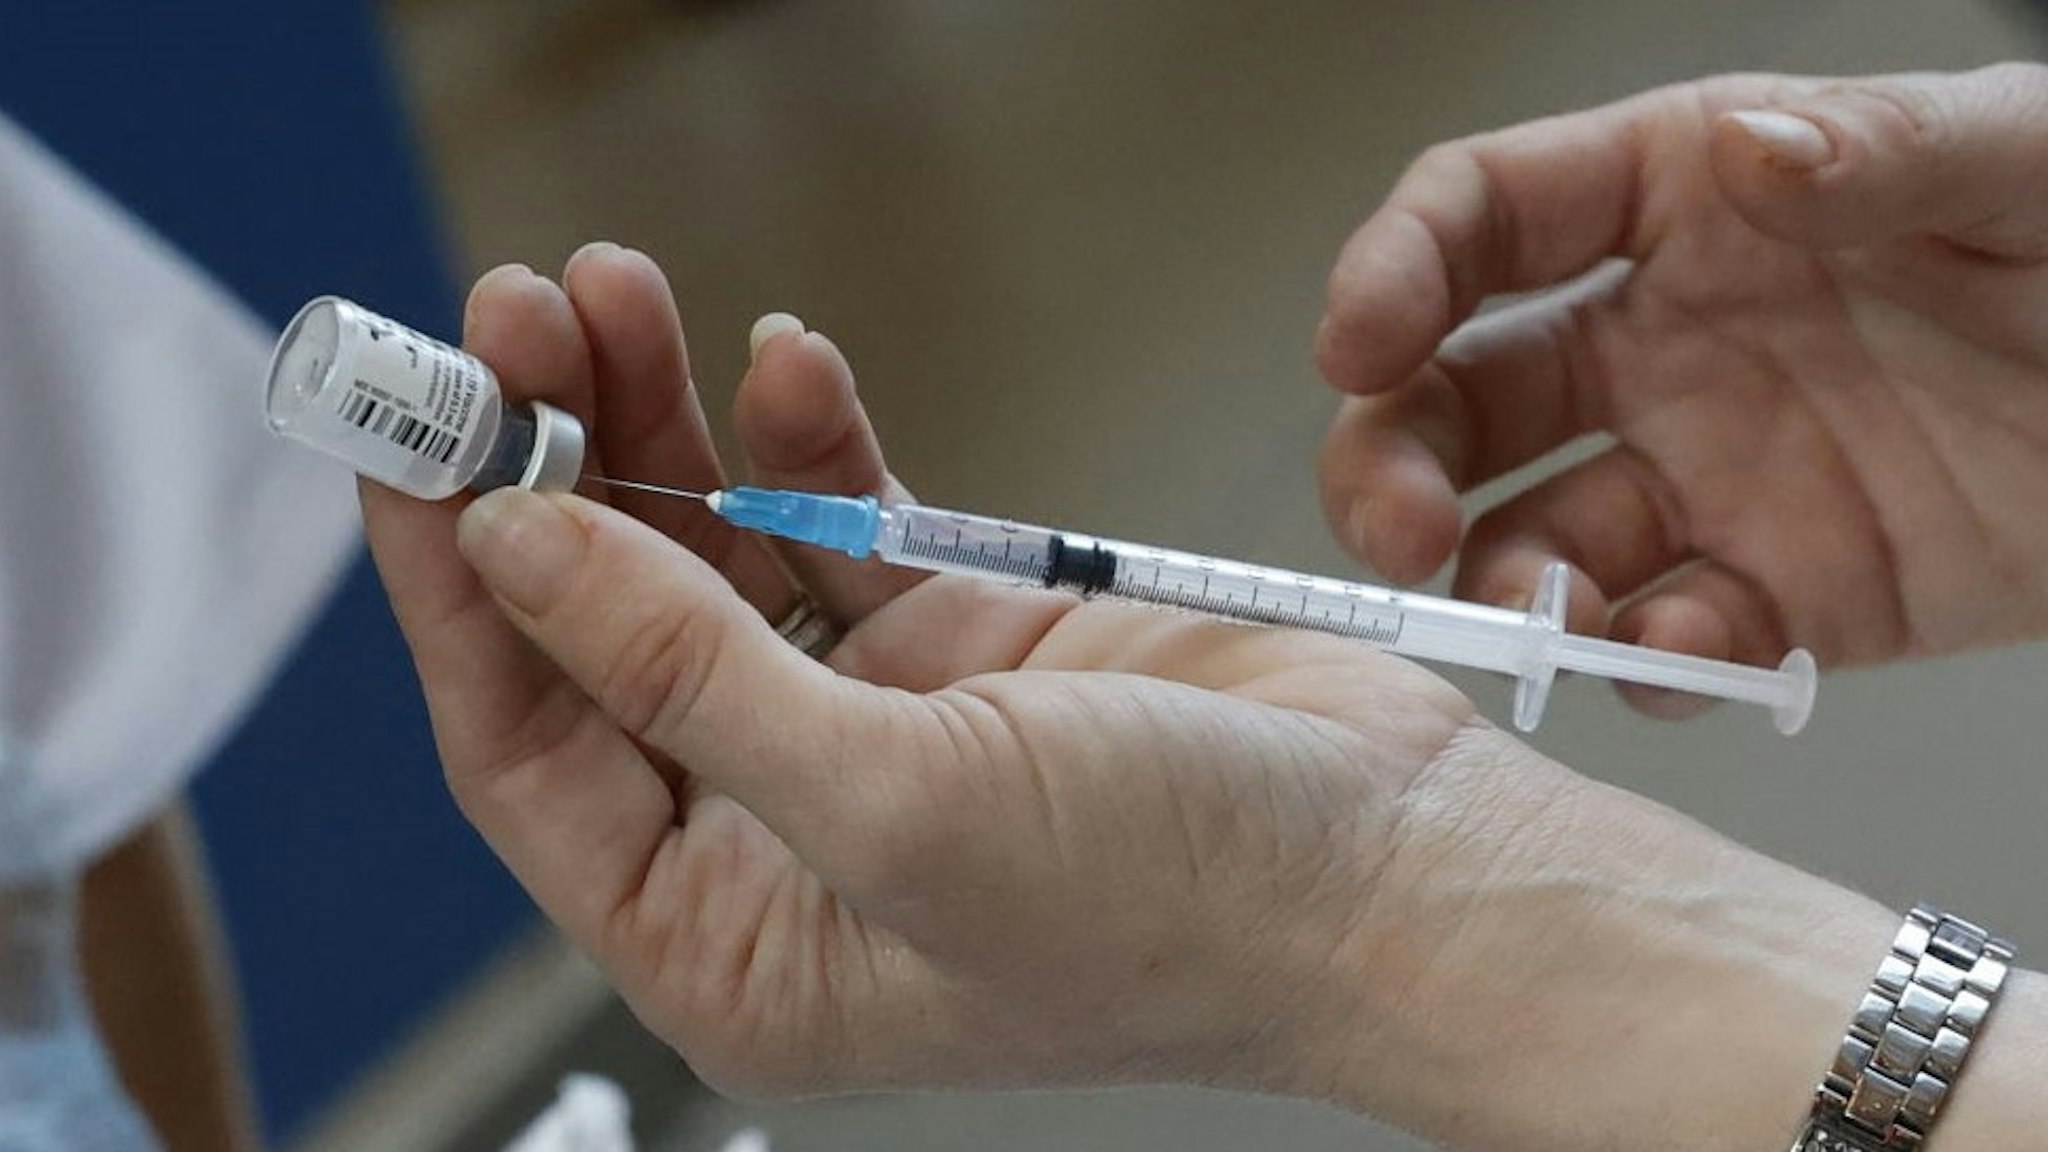 A medical worker prepares a dose of COVID-19 vaccine at Sourasky Medical Center (Ichilov) in the Israeli coastal city of Tel Aviv, on December 20, 2020. - Israel has ordered 14 million doses of the vaccine -- covering seven million people, as two doses are required per person for optimal protection -- from Pfizer as well as US biotech firm Moderna. The vaccine will be rolled out at 10 hospitals and vaccination centres around Israel for healthcare workers from Sunday, according to the health ministry. (Photo by JACK GUEZ / AFP) (Photo by